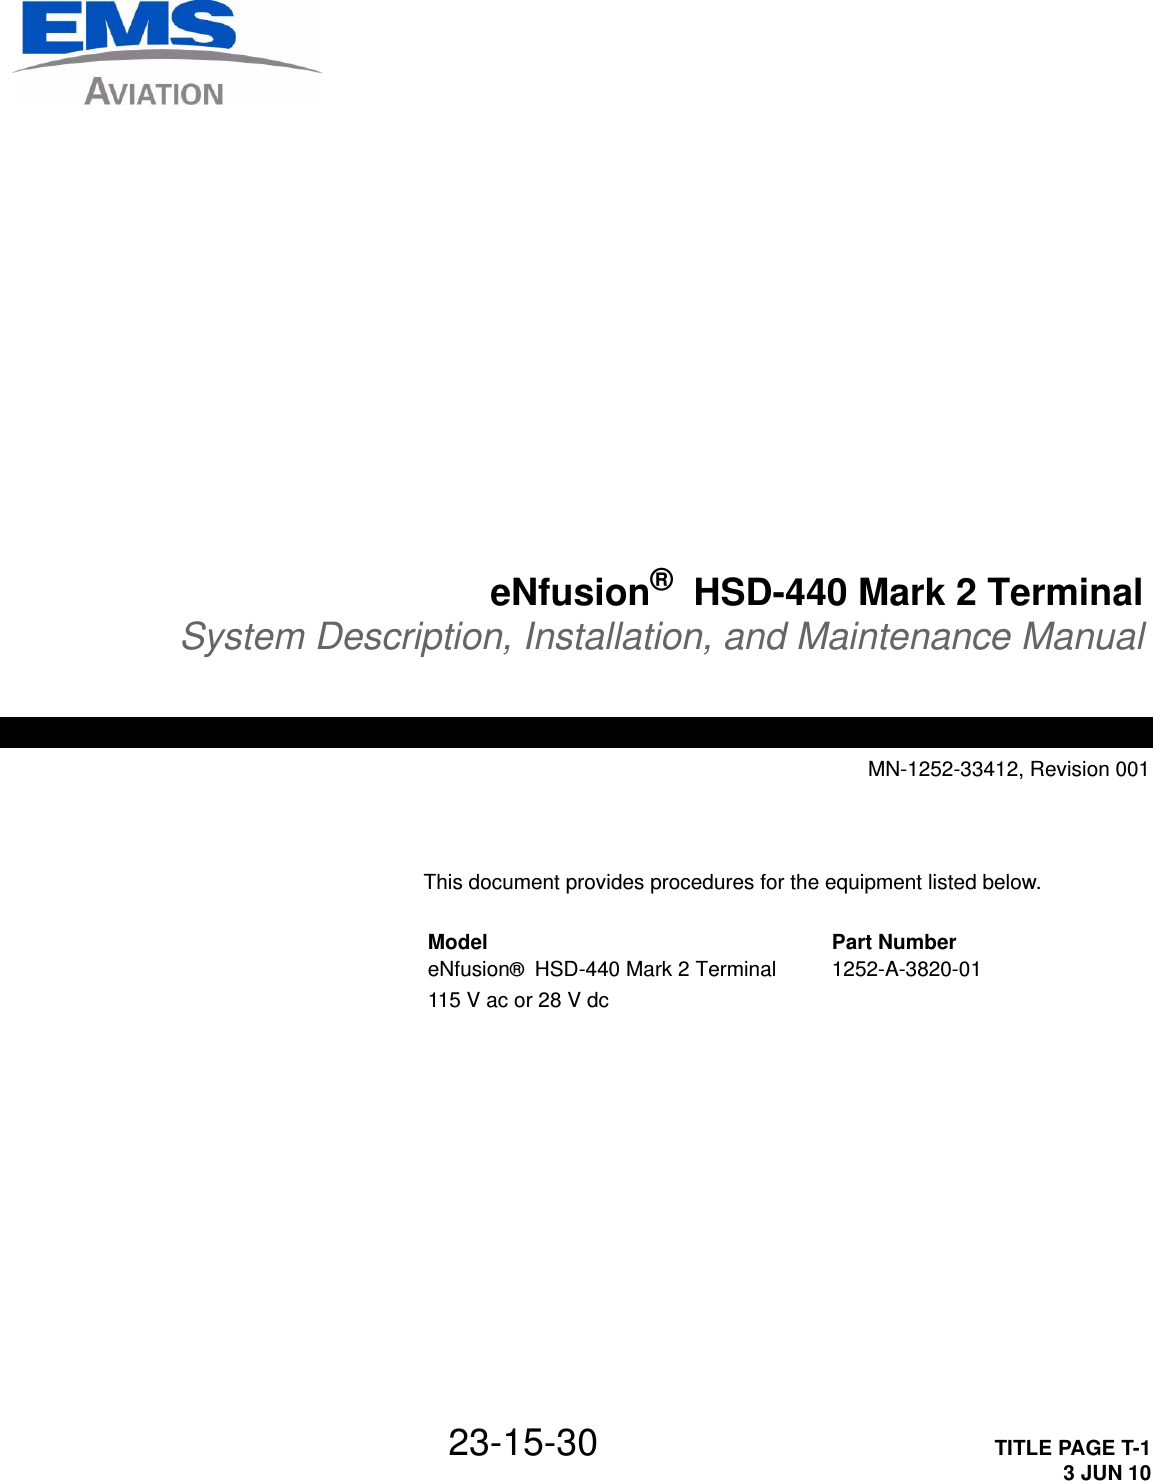 23-15-30 TITLE PAGE T-13 JUN 10eNfusion®  HSD-440 Mark 2 TerminalSystem Description, Installation, and Maintenance ManualMN-1252-33412, Revision 001This document provides procedures for the equipment listed below.Model Part NumbereNfusion®  HSD-440 Mark 2 Terminal115 V ac or 28 V dc1252-A-3820-01